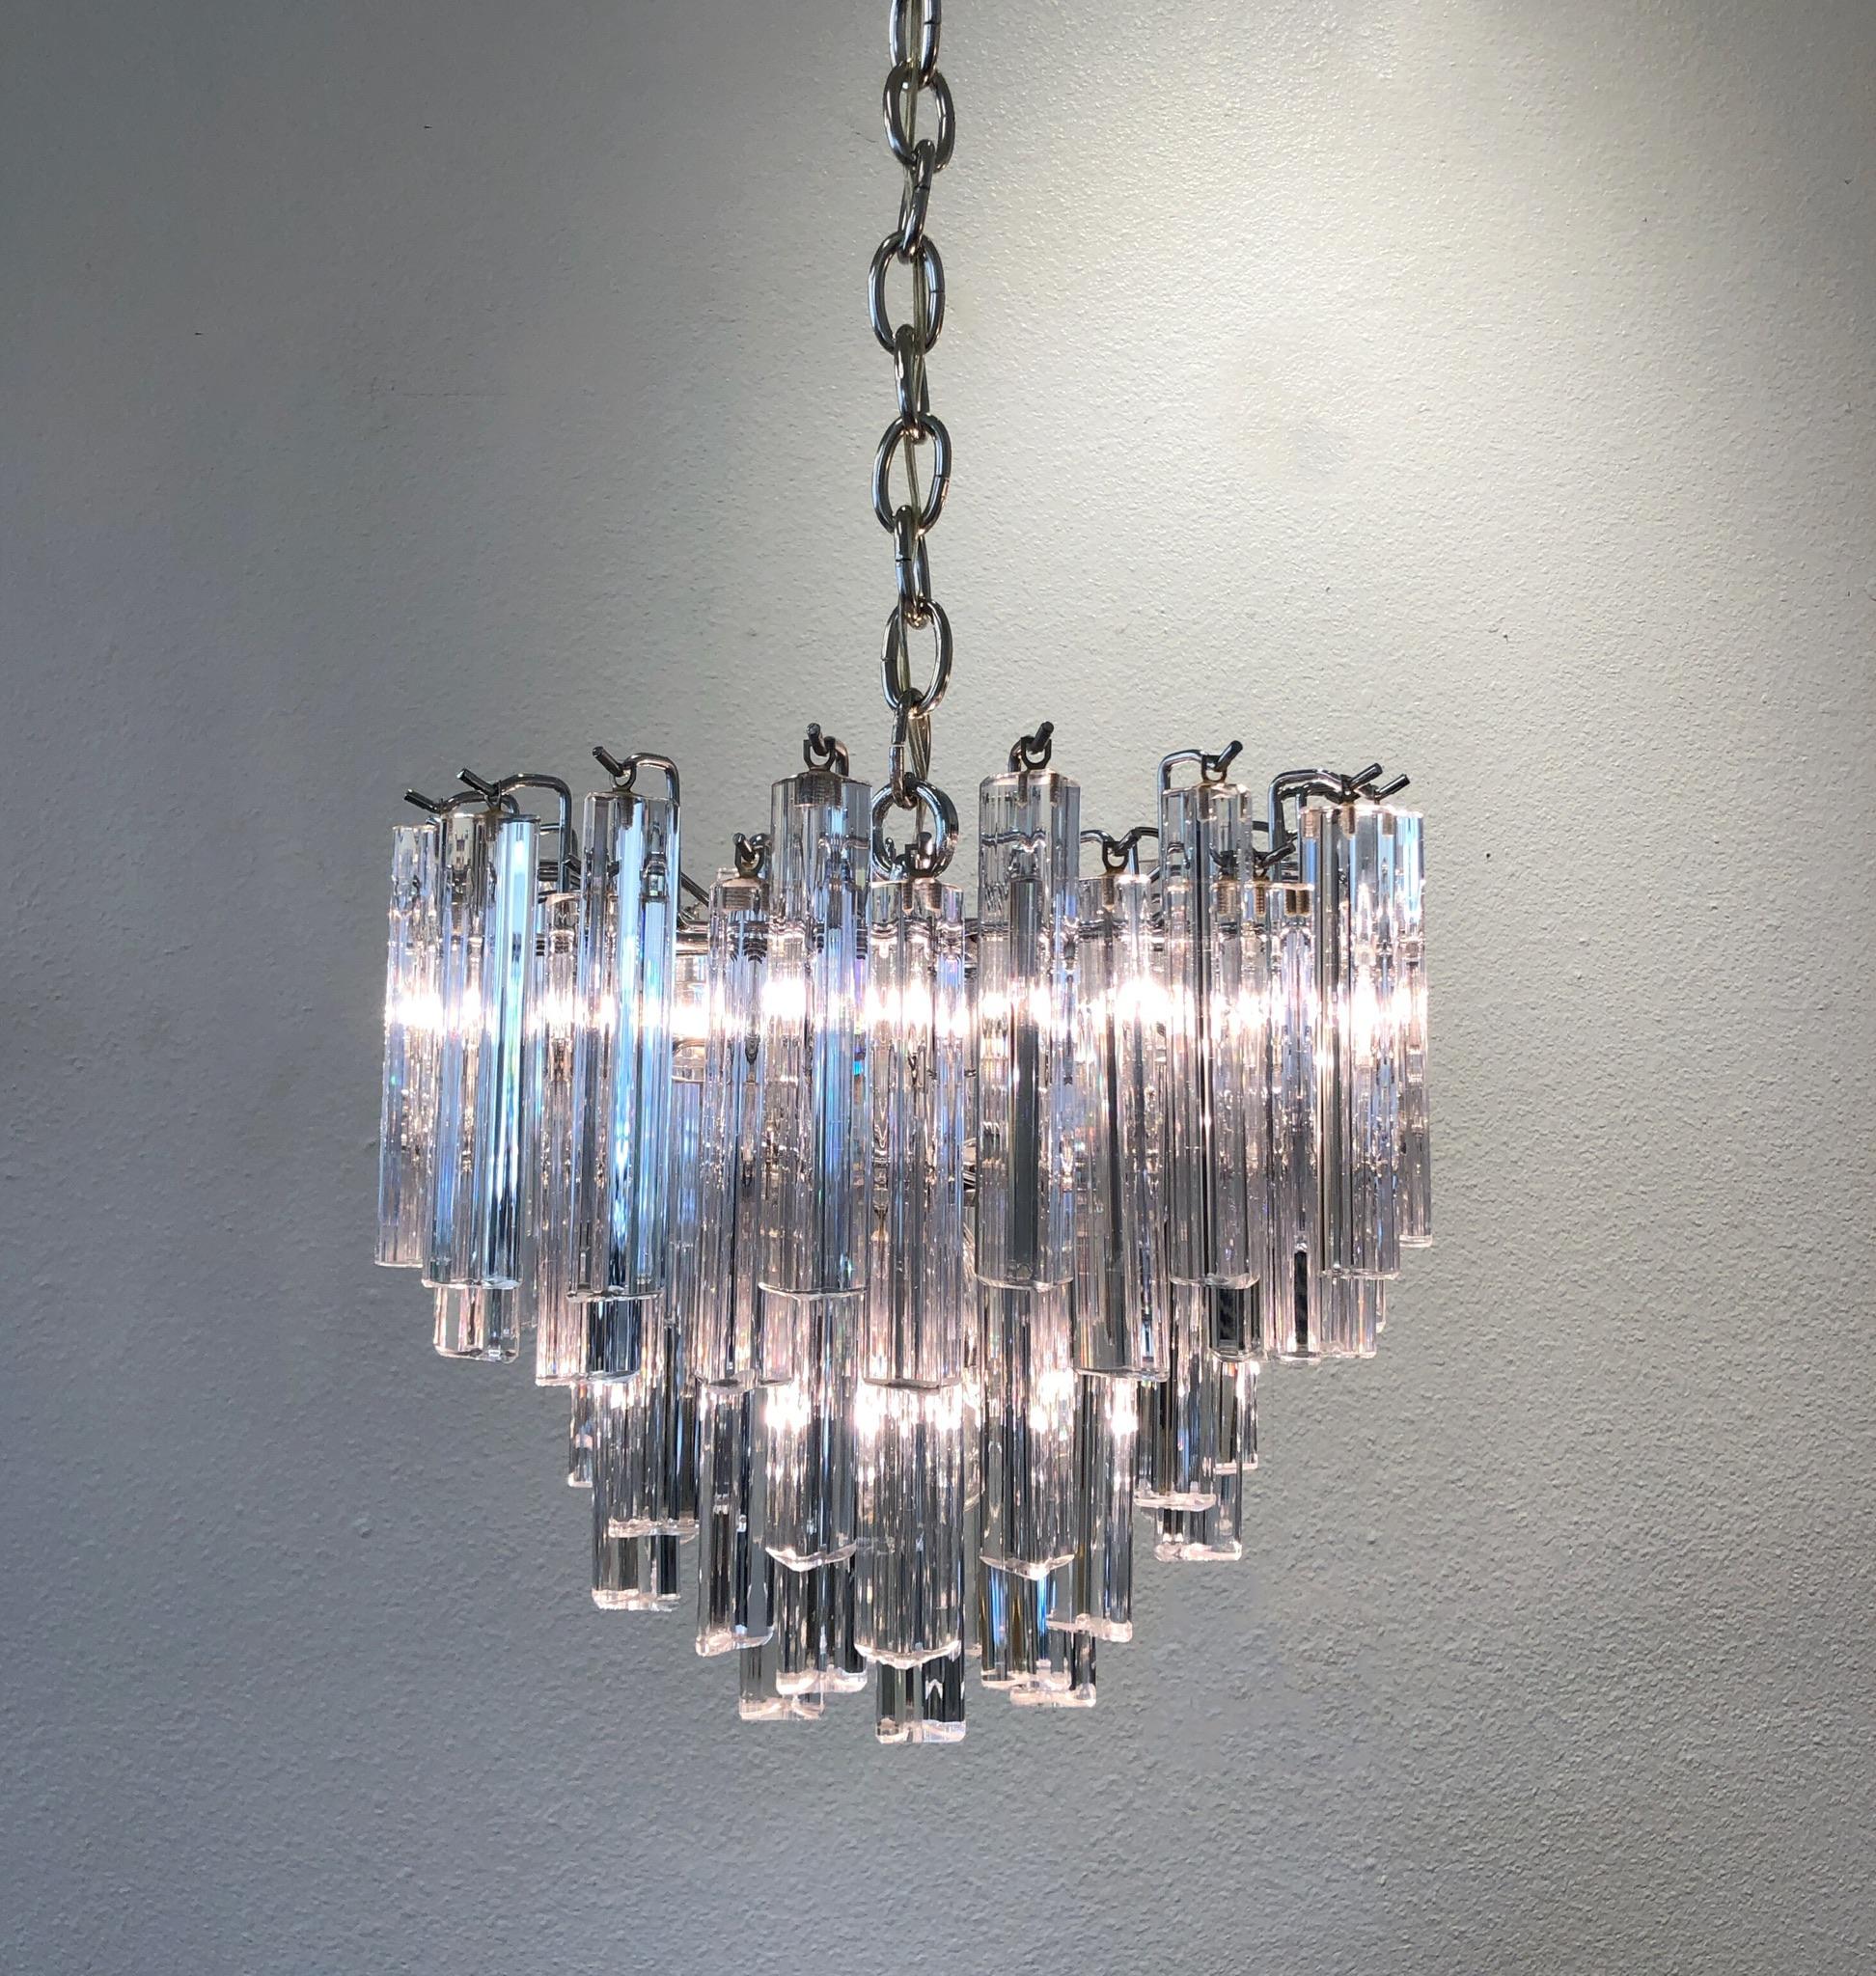 A glamorous small Italian clear Murano glass and chrome chandelier design by Venini n the 1970s. Newly rewired.

Dimensions: 15” diameter, 13.5” high. (dimensions not including chain).